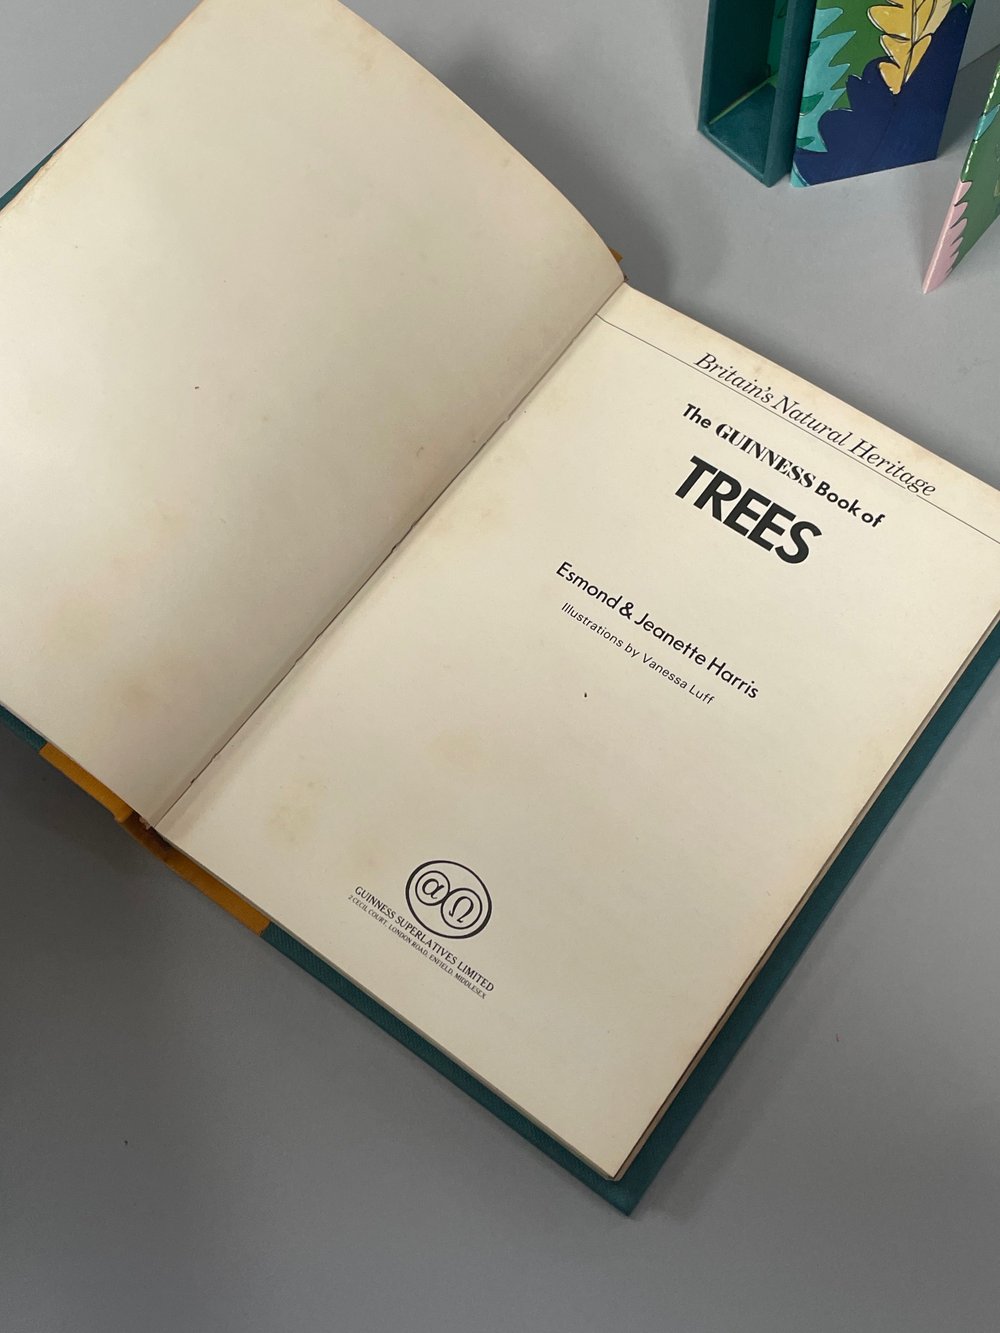 The Guiness Book of Trees, Gardeners booms 